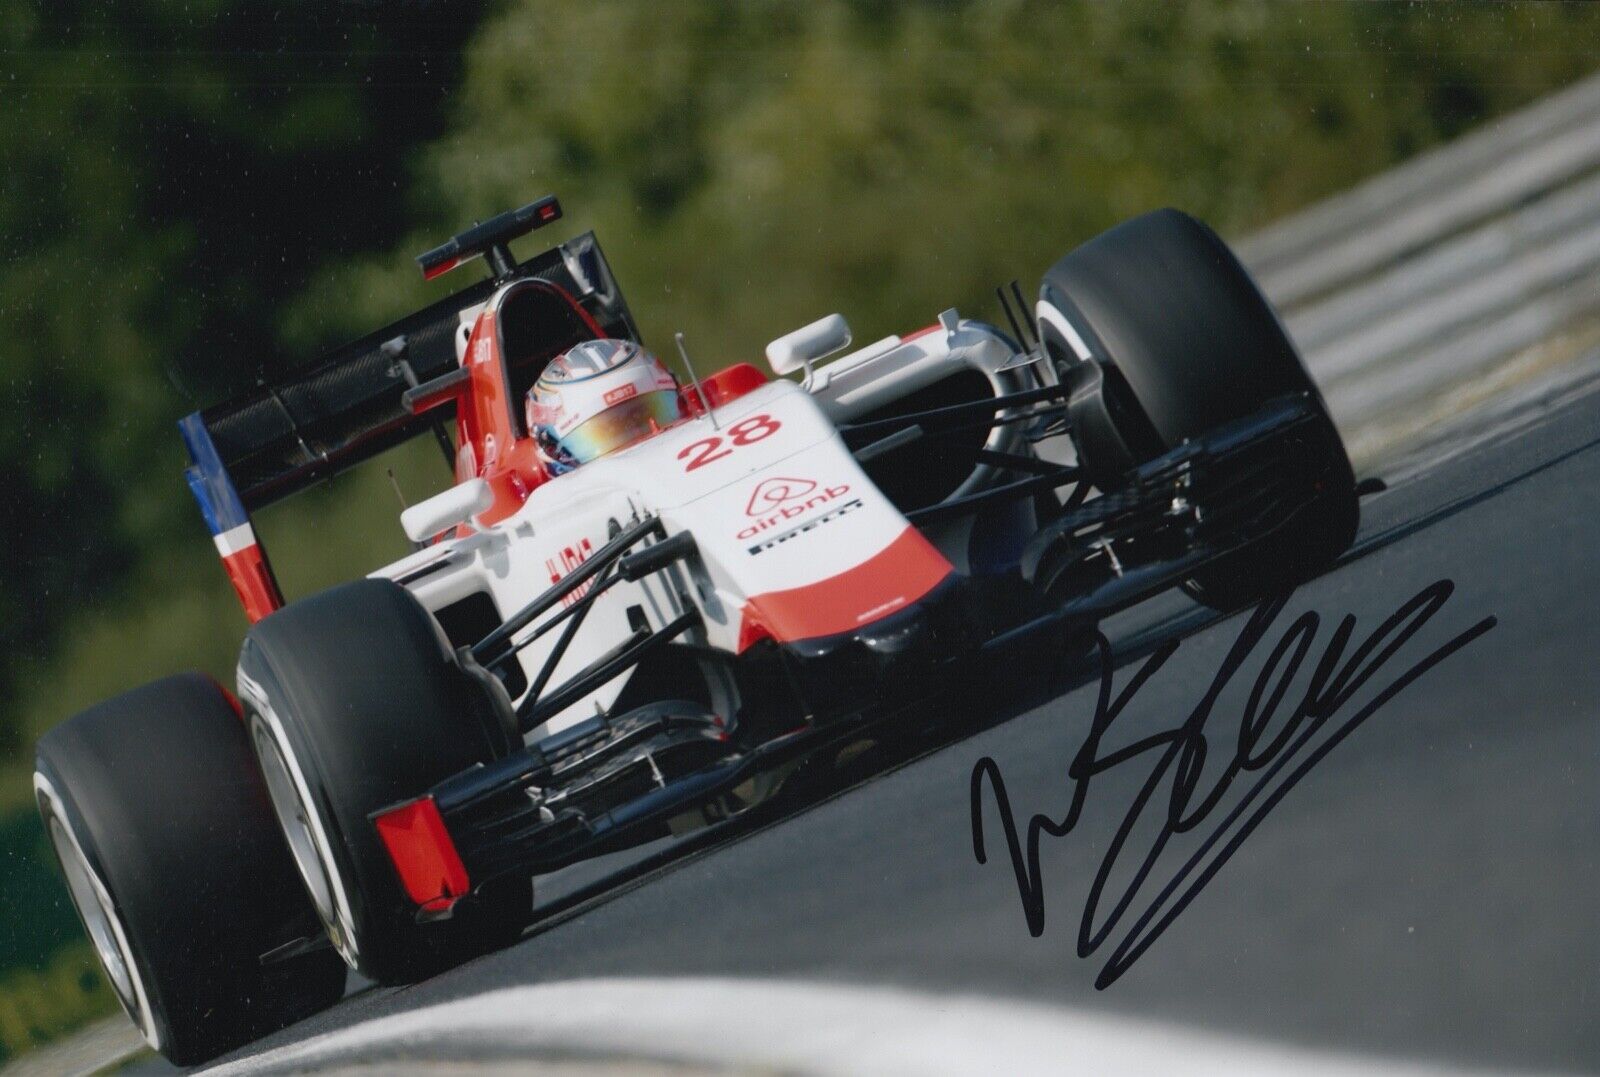 Will Stevens Hand Signed 12x8 Photo Poster painting F1 Autograph Manor Marussia 20